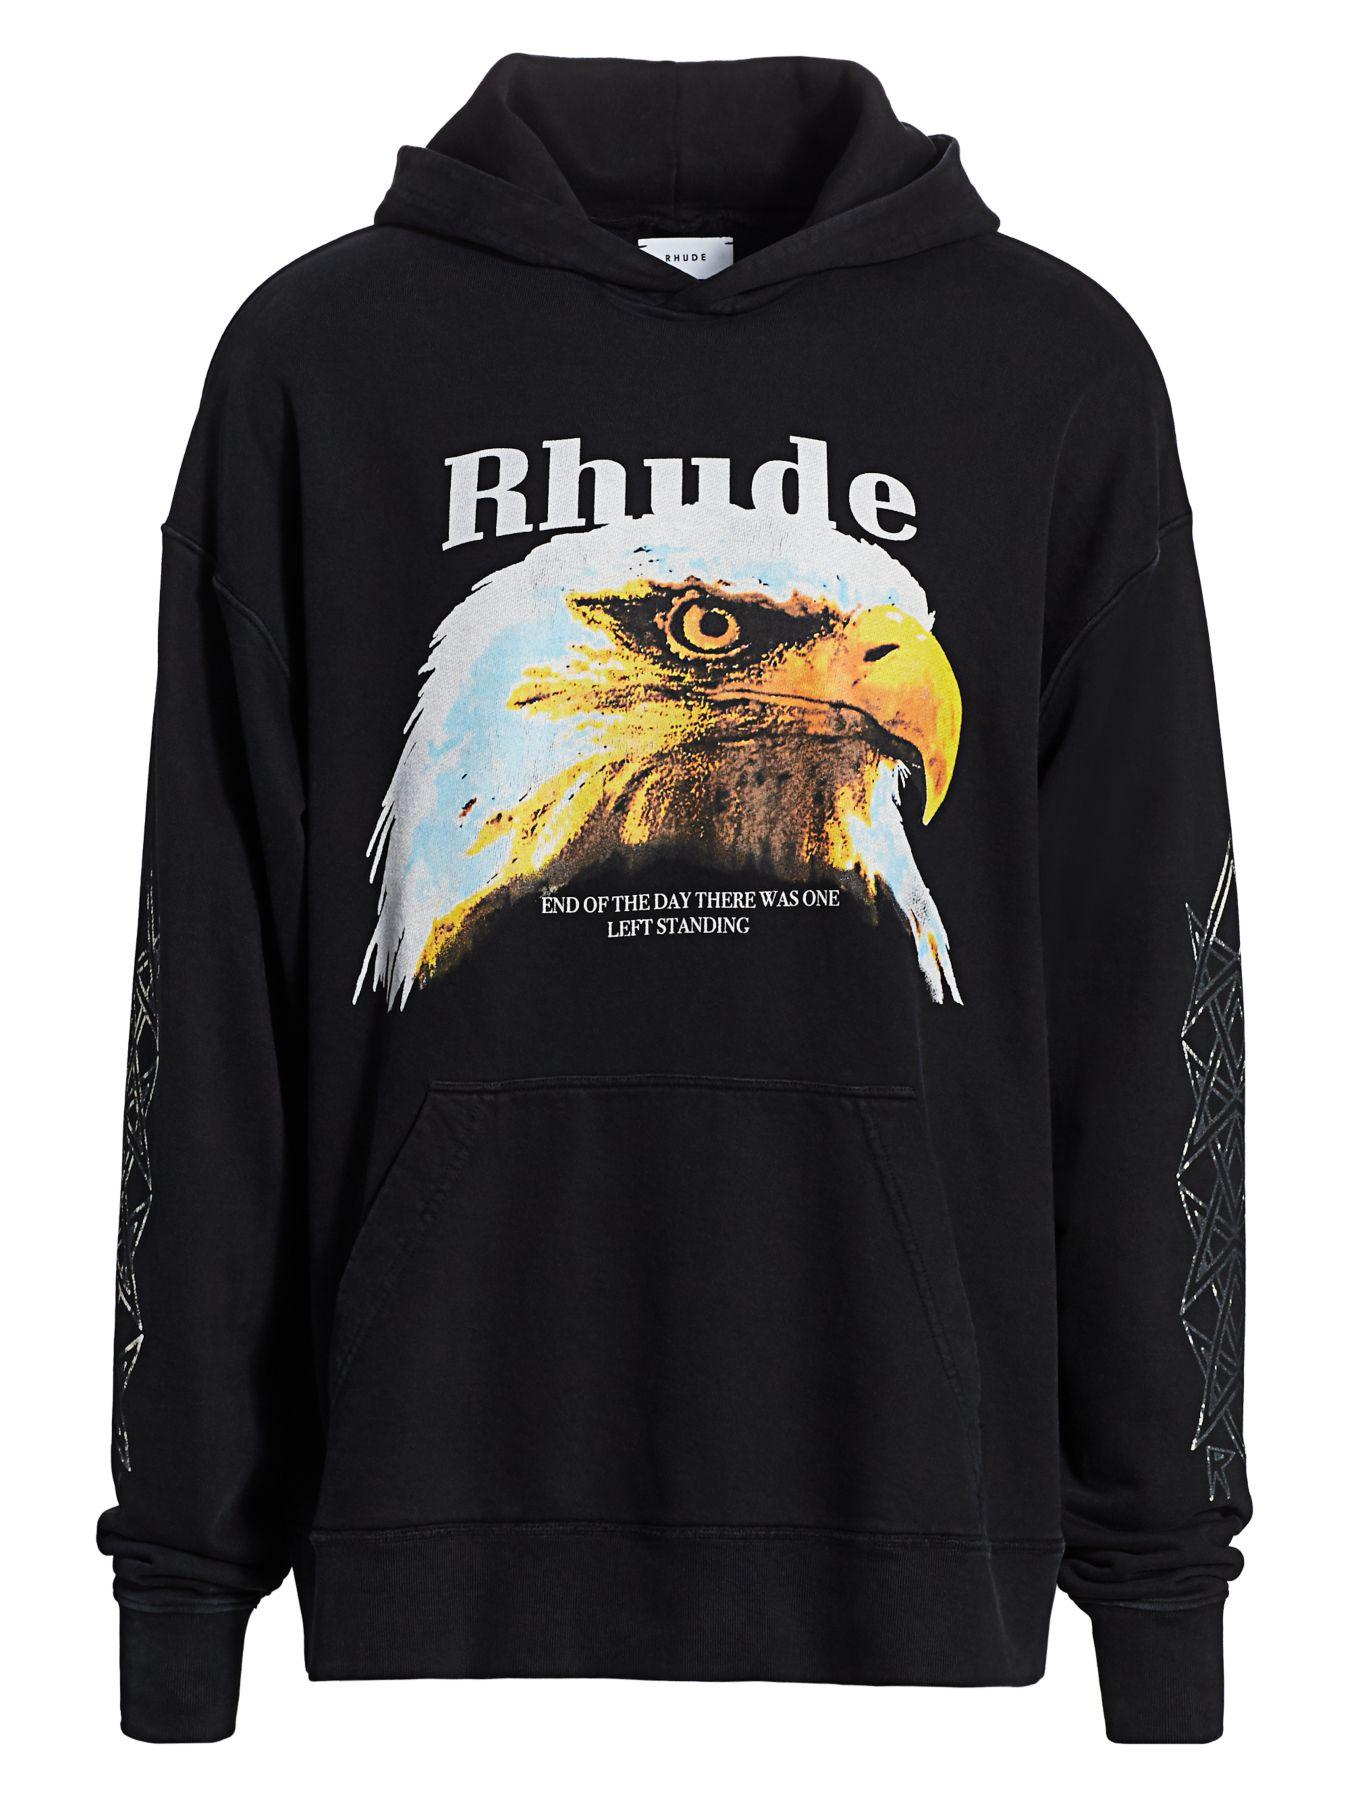 Rhude Cotton Bald Eagle Hoodie in Black for Men - Save 39% - Lyst